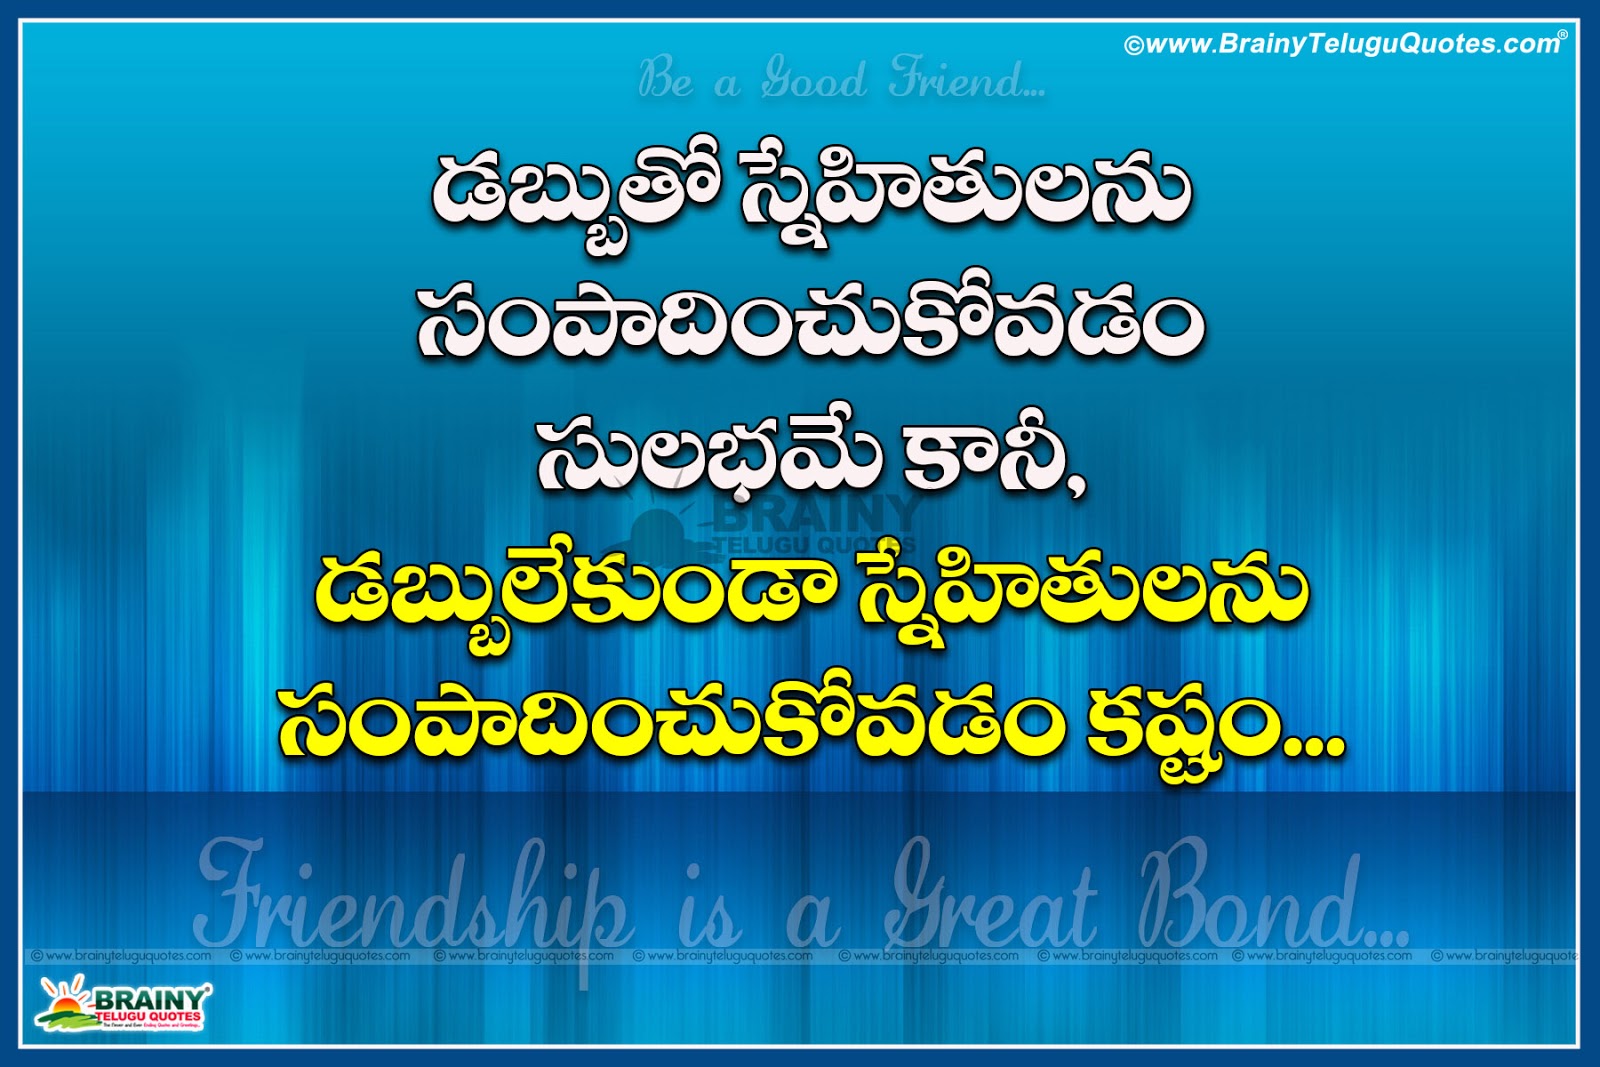 Heart Touching Friendship Messages and Quotes in Telugu